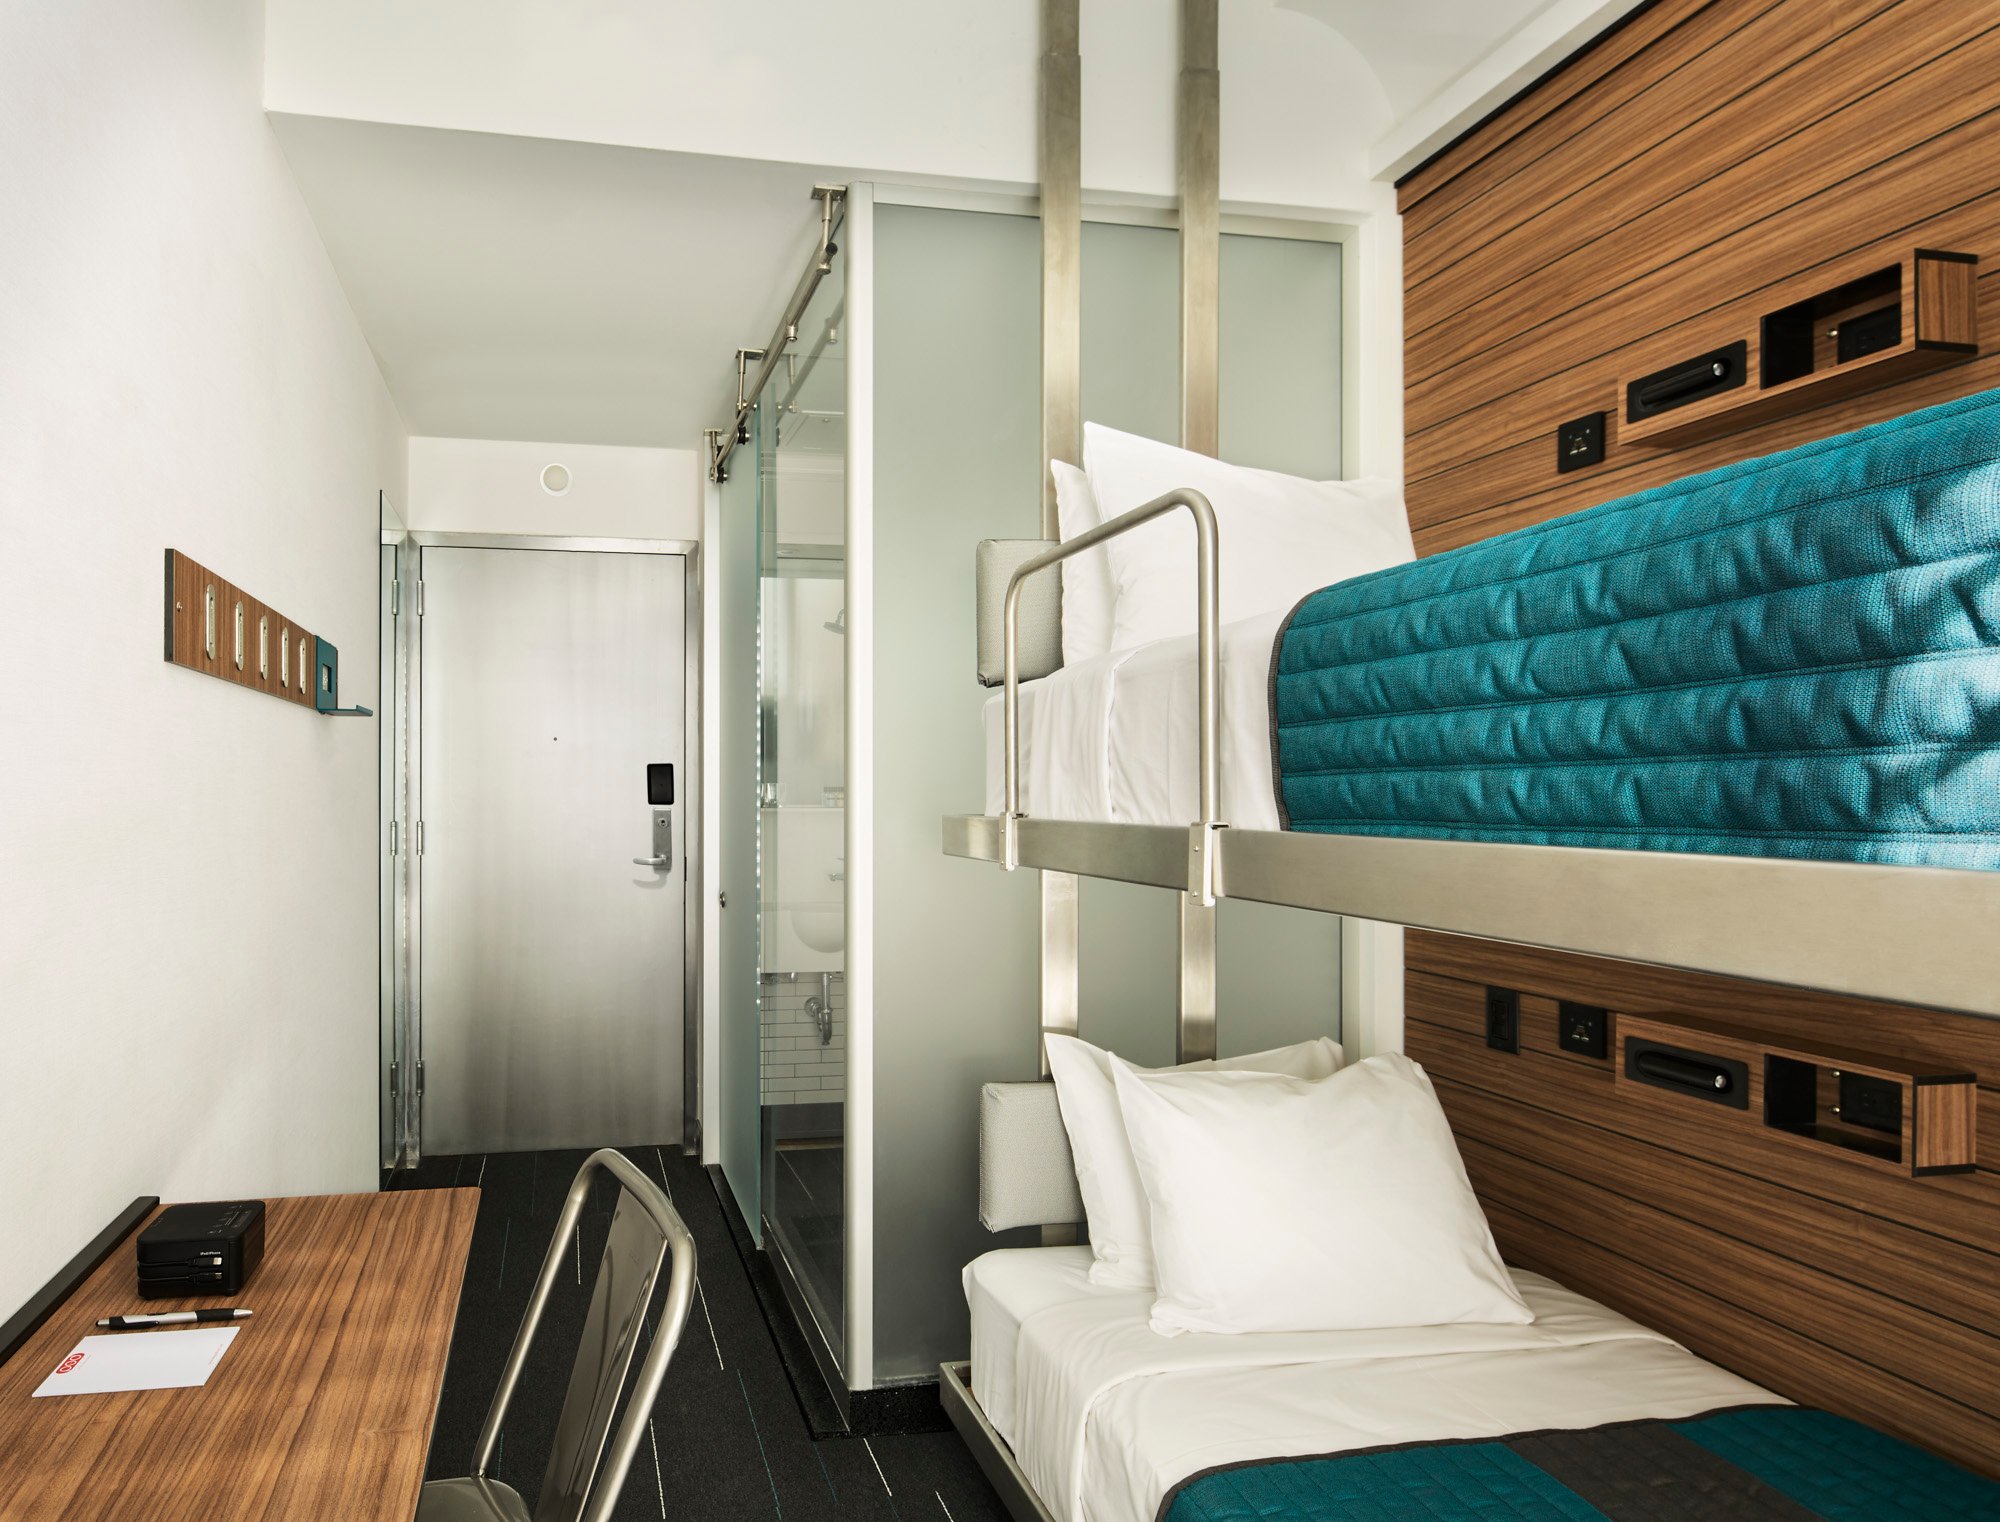 This property is the fifth Pod Hotel to open and it is the brands fourth located in New York City